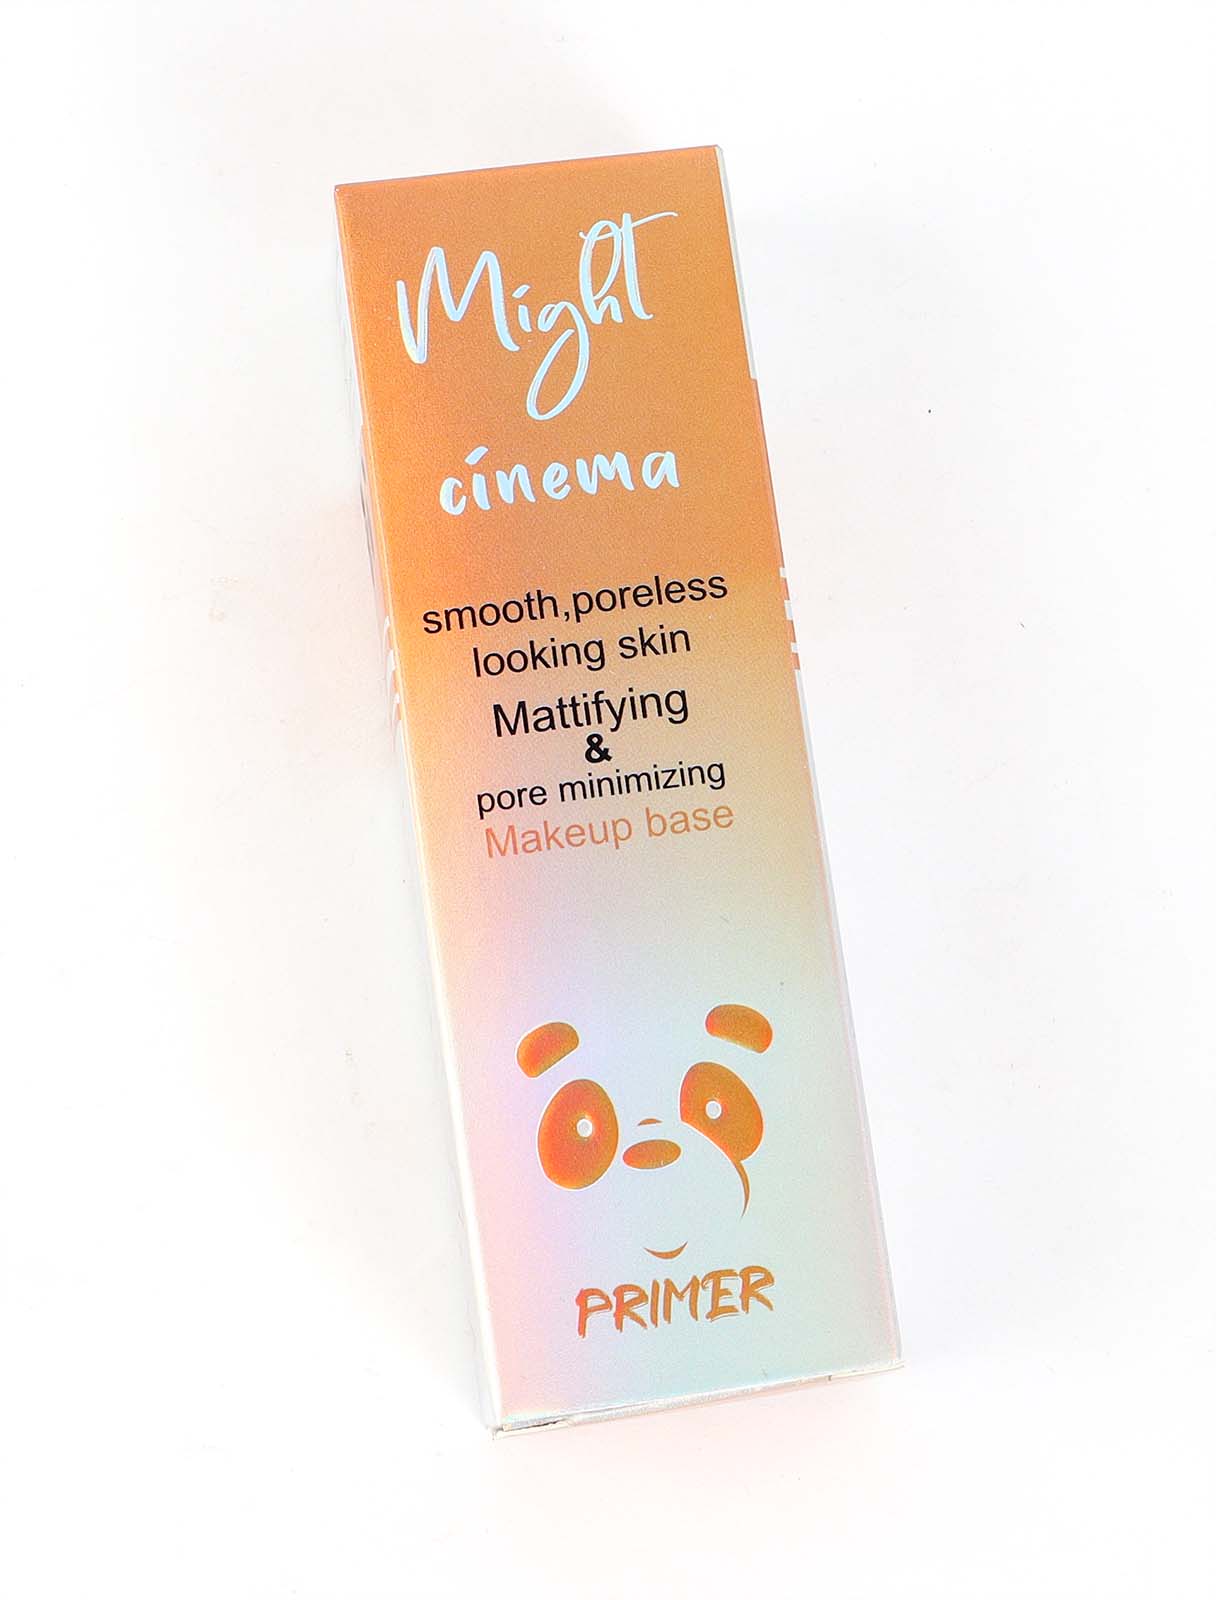 Primer tube to block pores before makeup for oily skin from Might Cinema